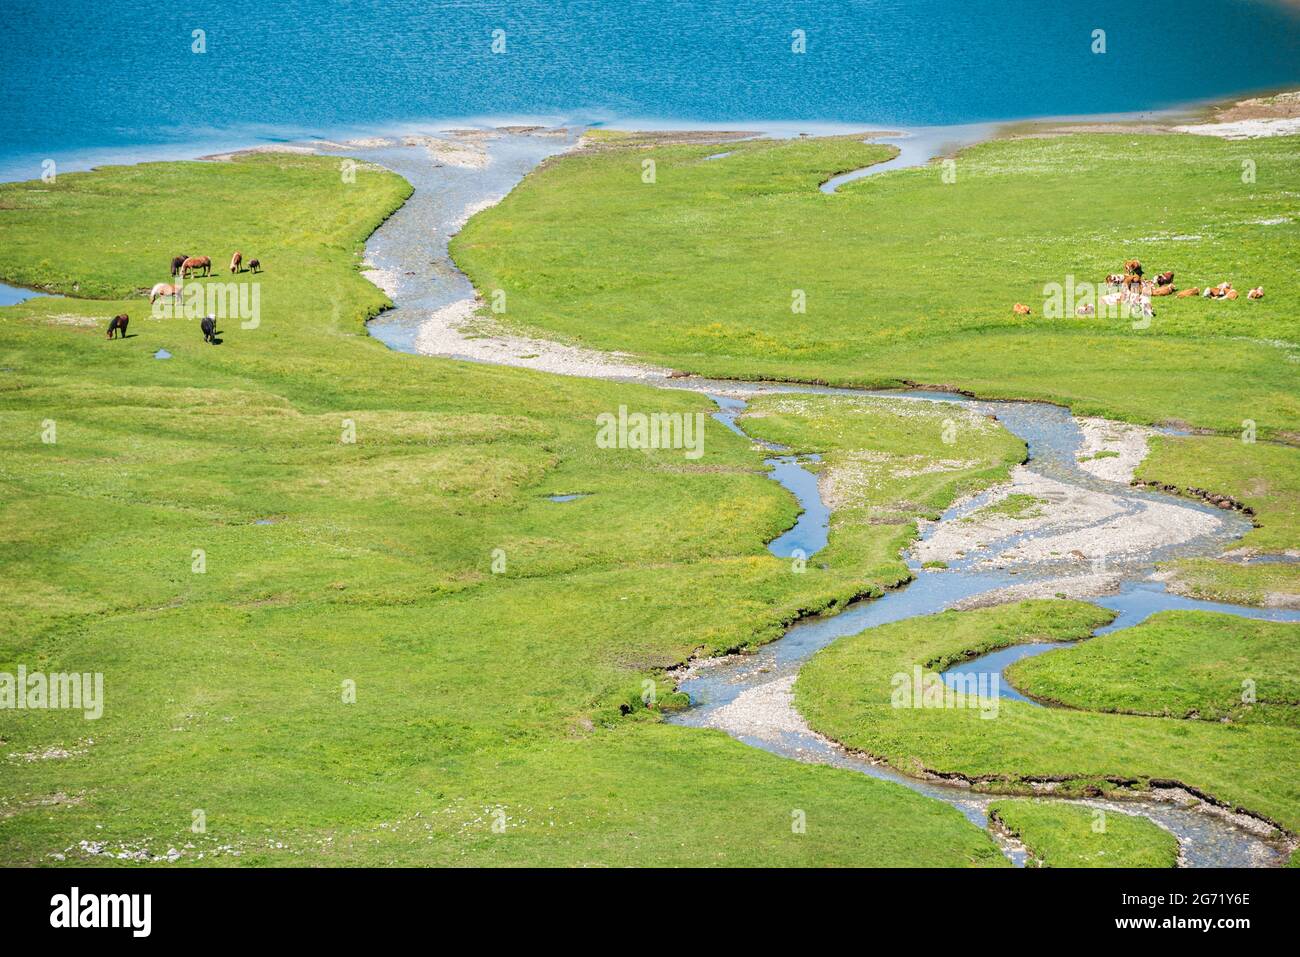 A herd of horses and cows grazing on an alpine meadow at the very shore of a mountain lake. Adult horses protect foals from the sun and insects. Stock Photo